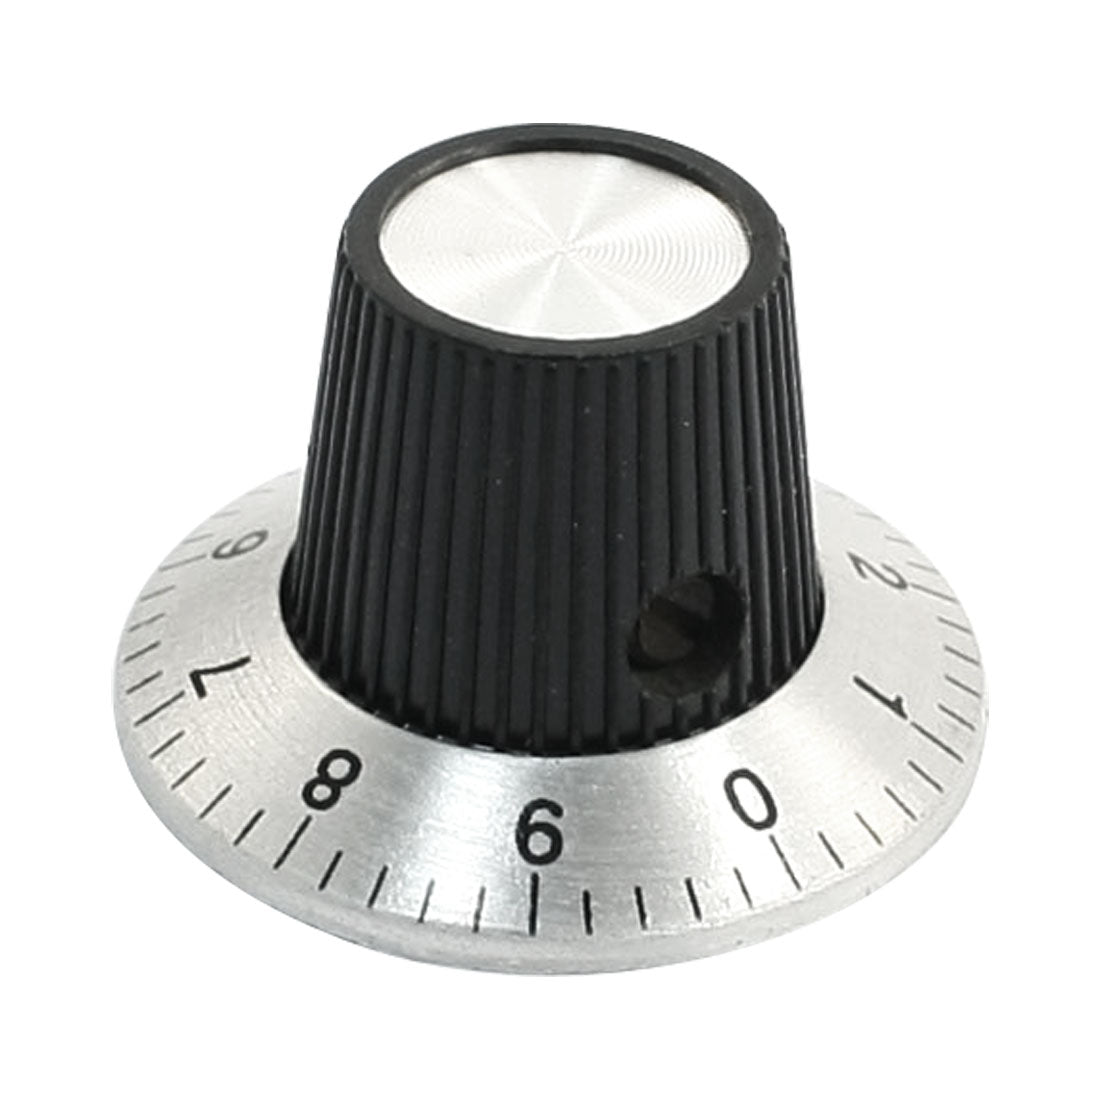 uxcell Uxcell Adjustable Turn 15mm Top Rotary Knob w Dial for 6mm Dia. Shaft Potentiometer